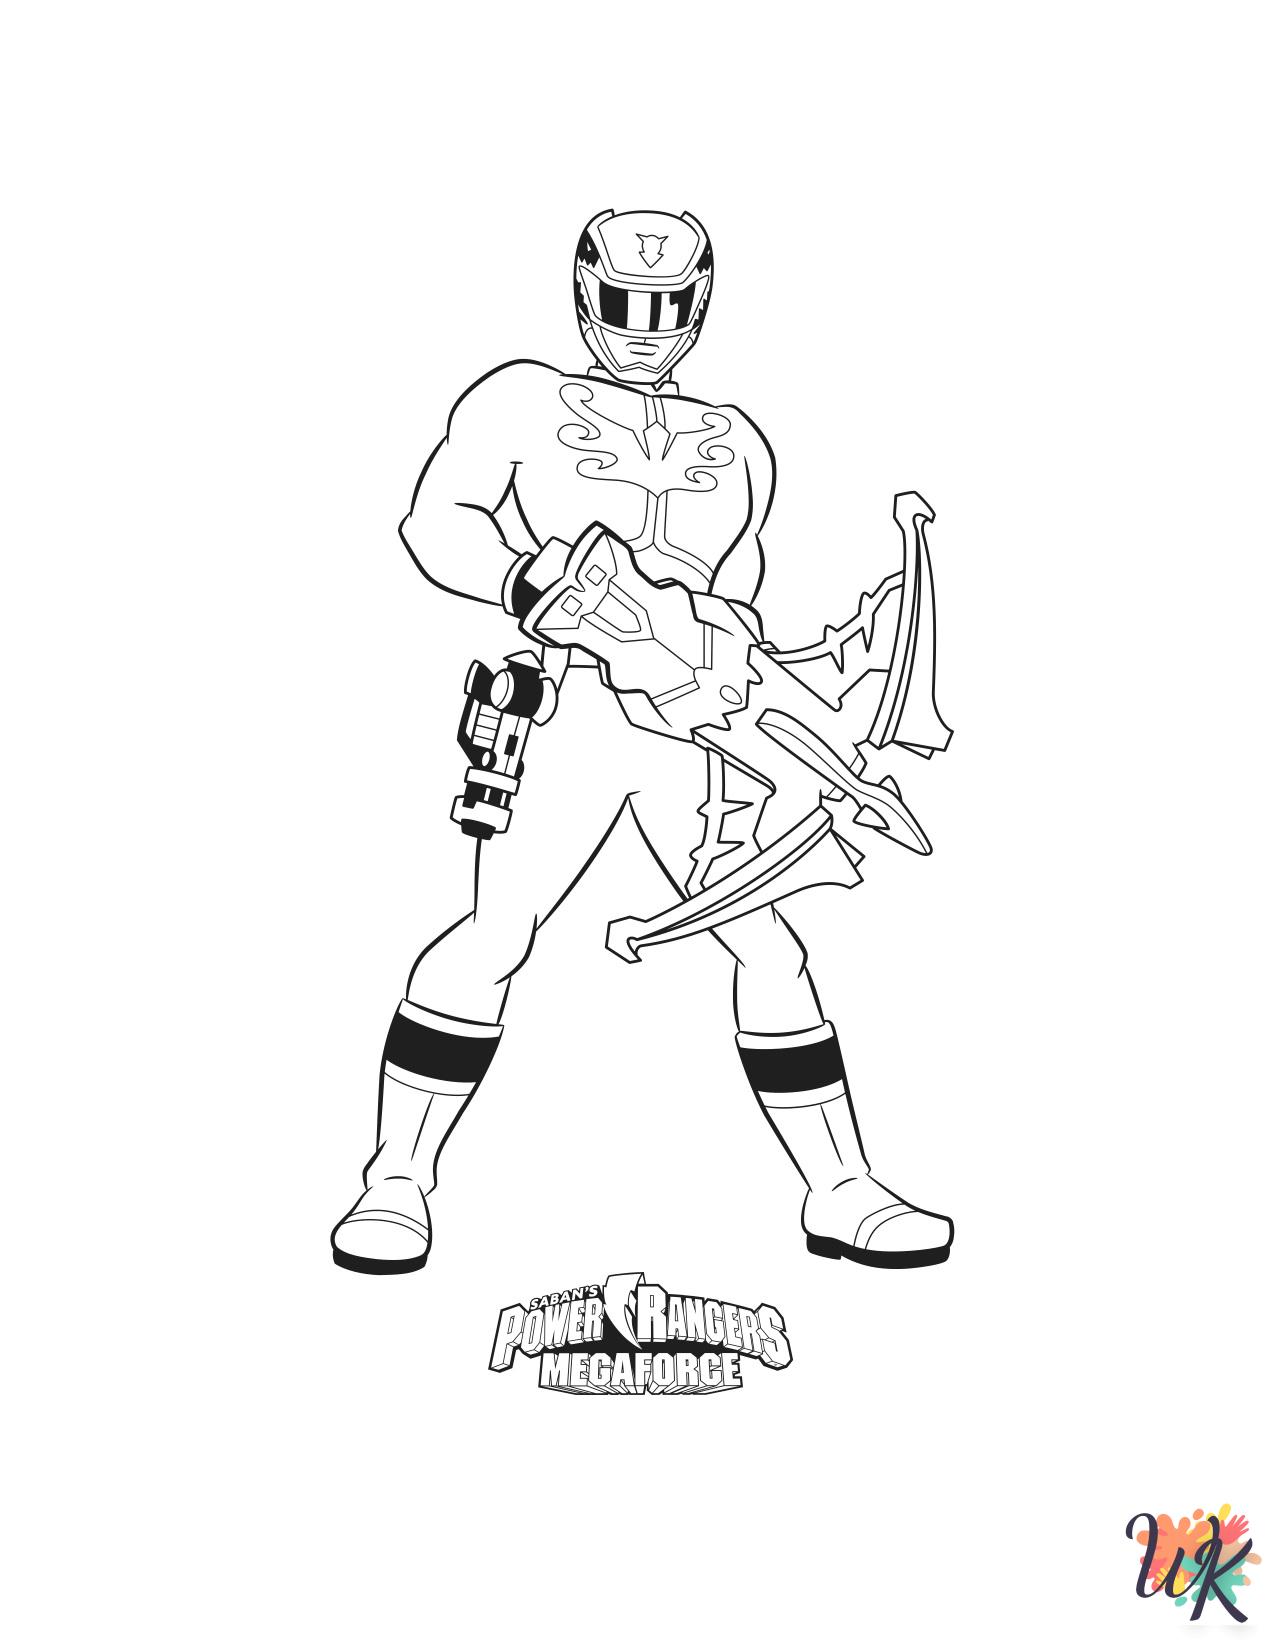 Power Rangers coloring pages for adults pdf